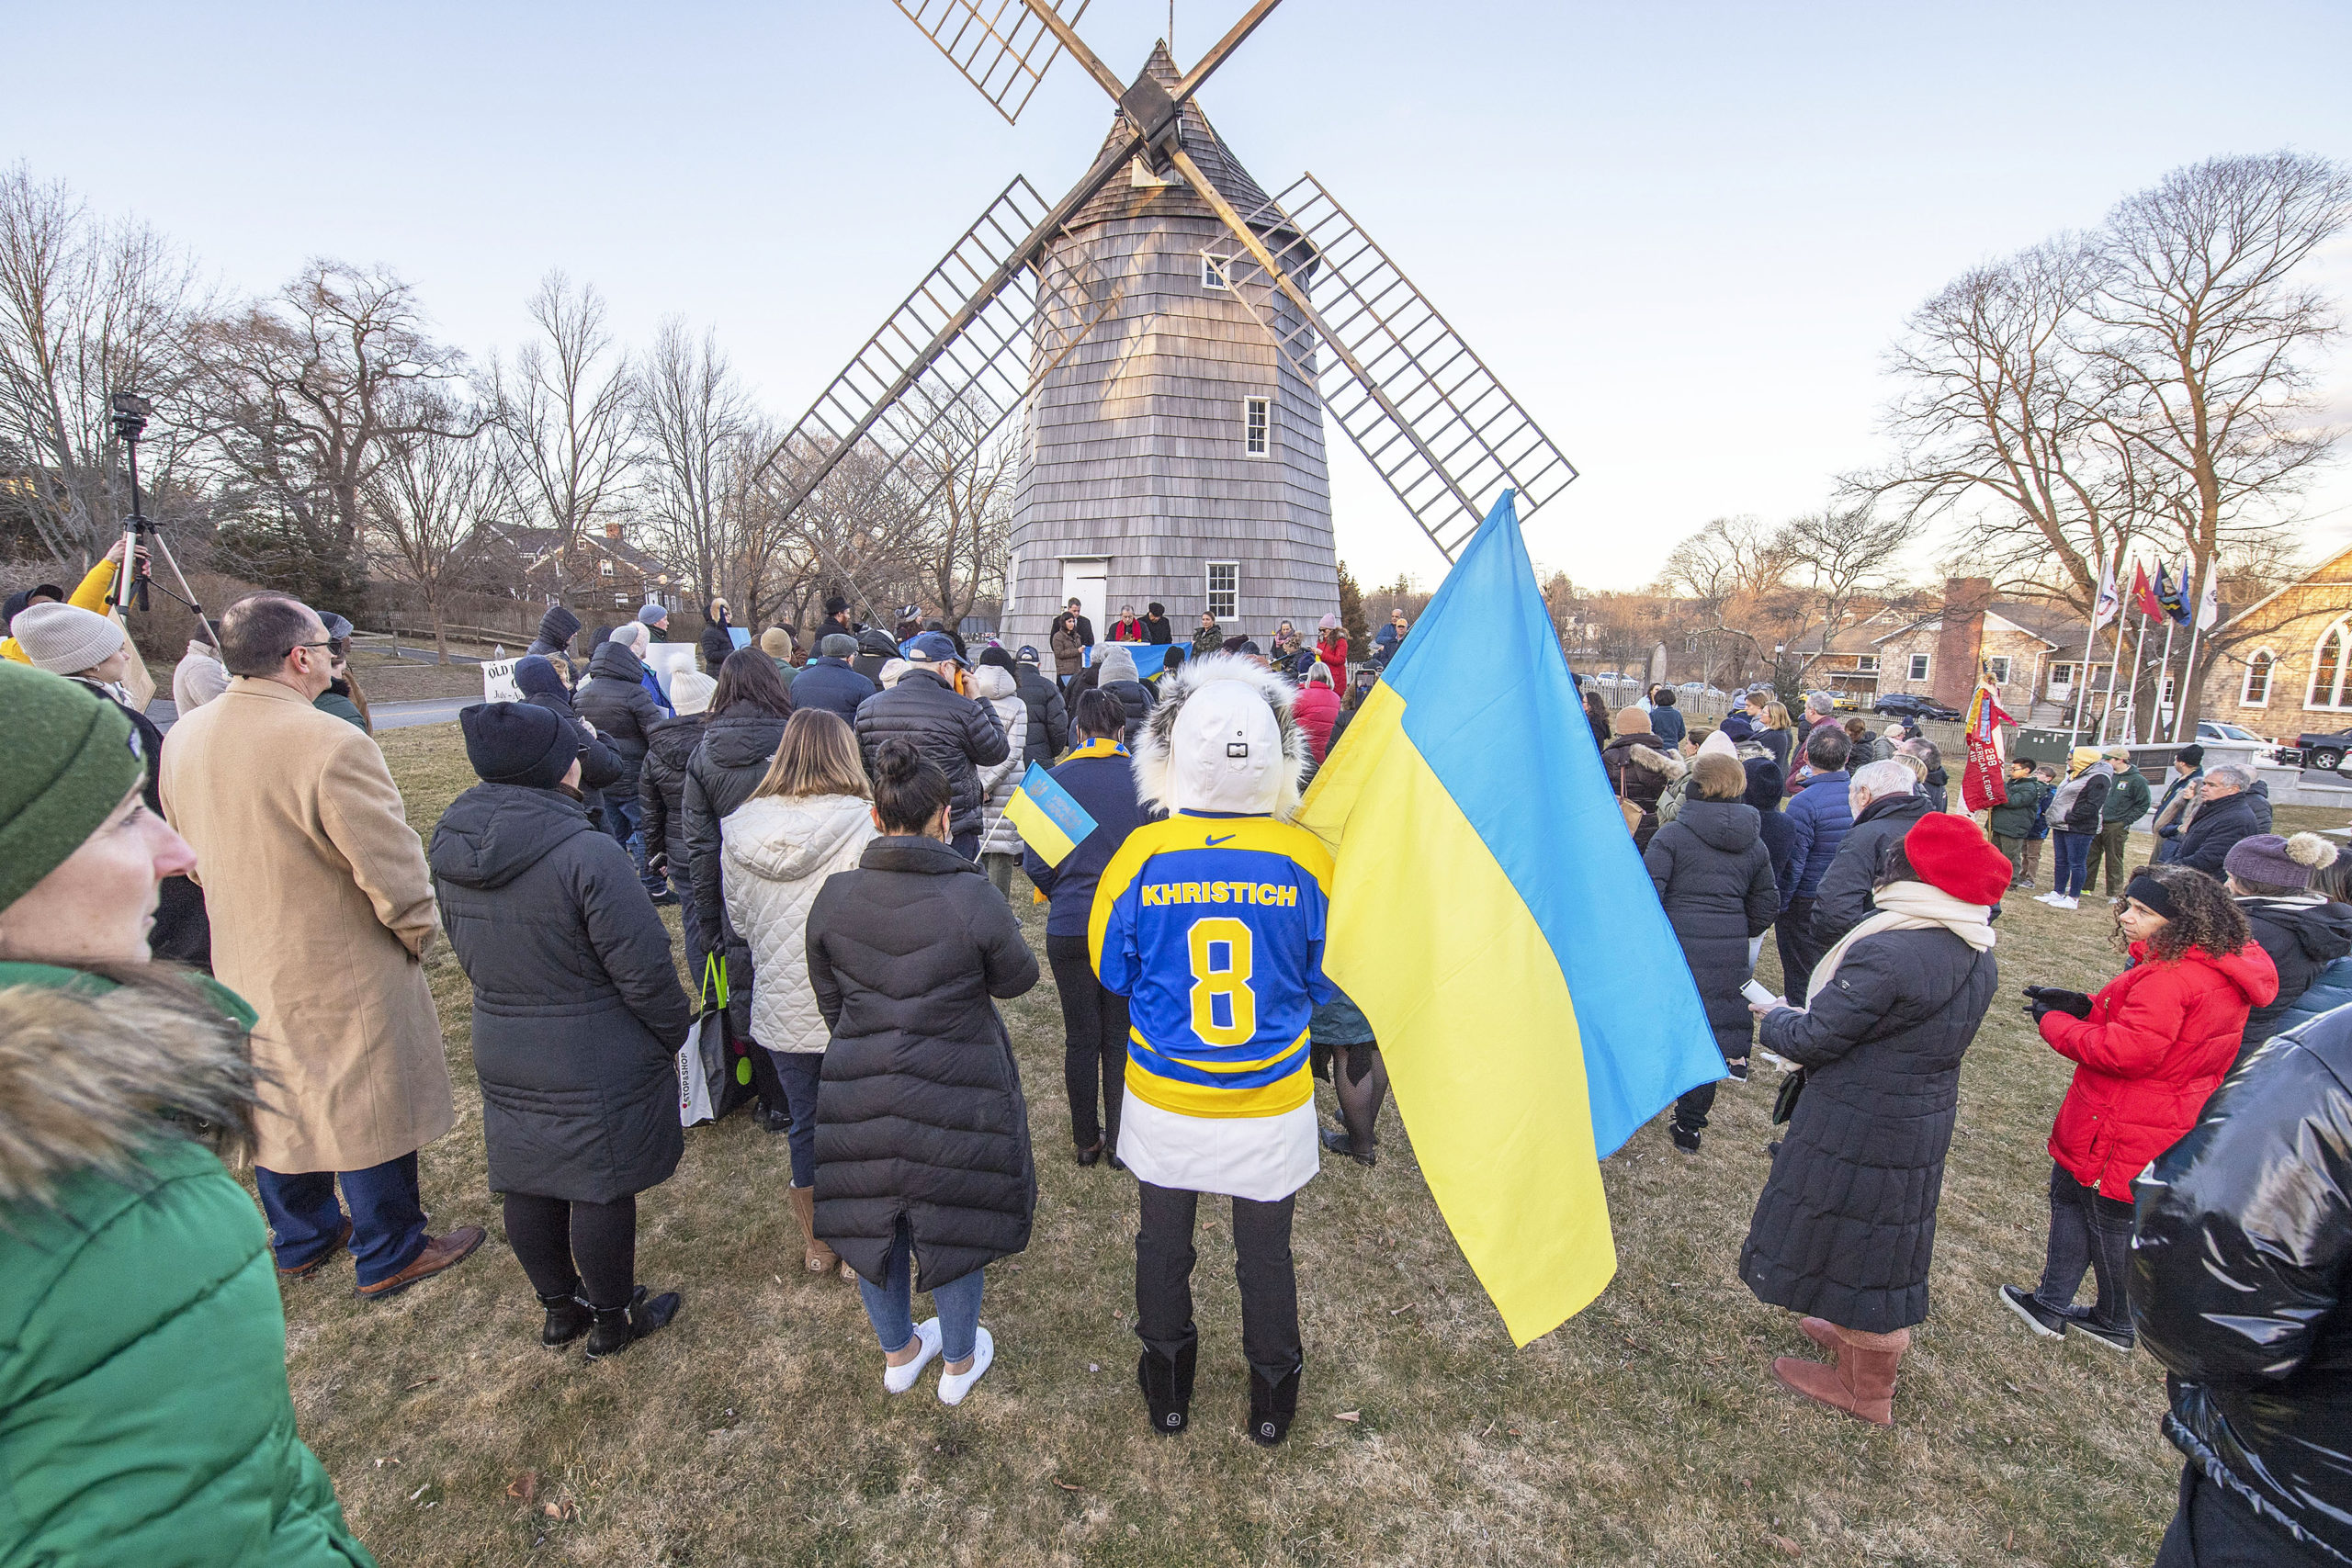 A rally in support of Ukraine during the current Russian invasion was held last Thursday on the Hook Mill Village Green in East Hampton. MICHAEL HELLER